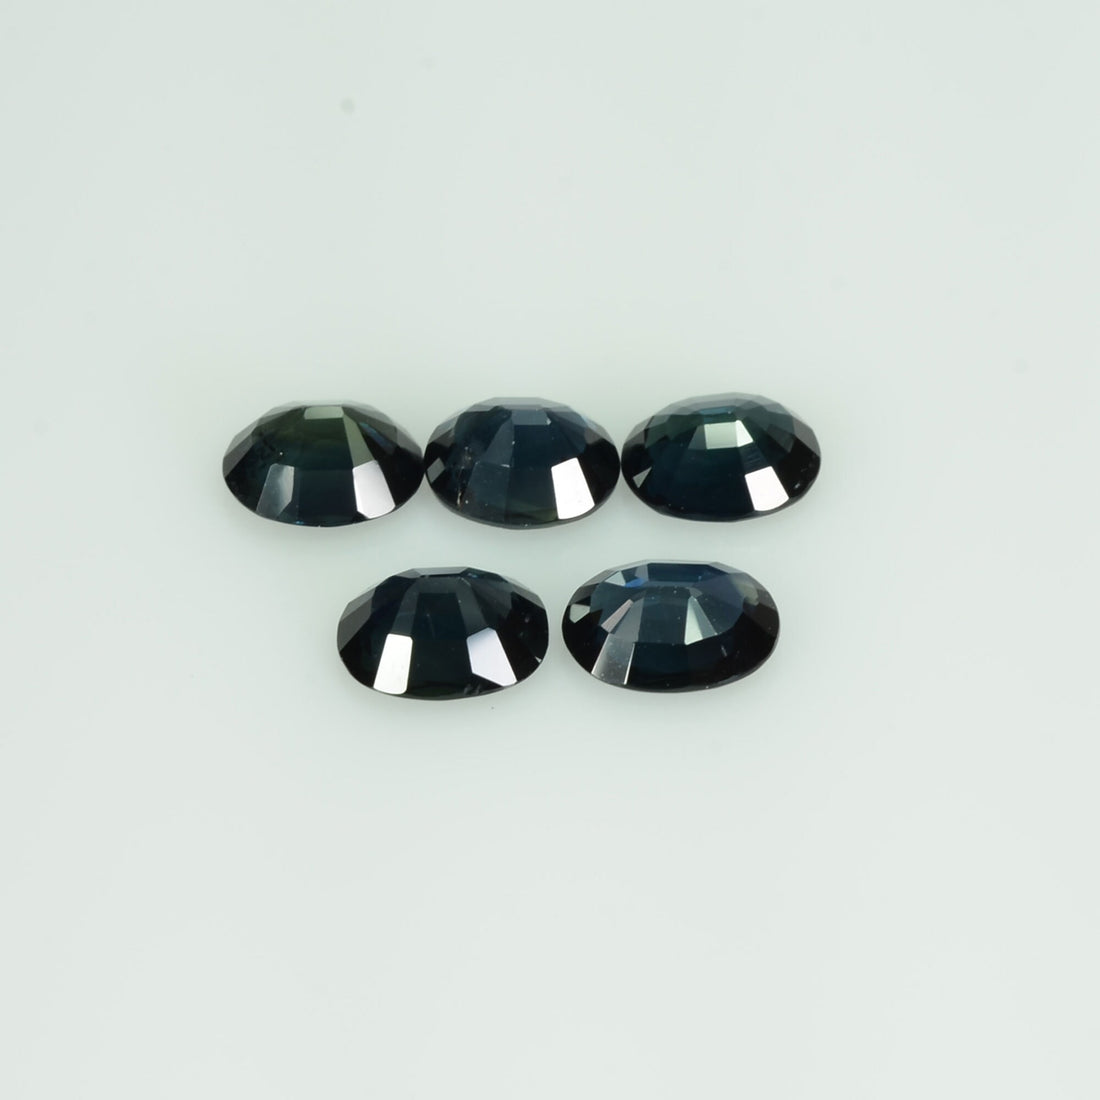 6x5 mm Natural Calibrated Blue Sapphire Loose Gemstone Oval Cut